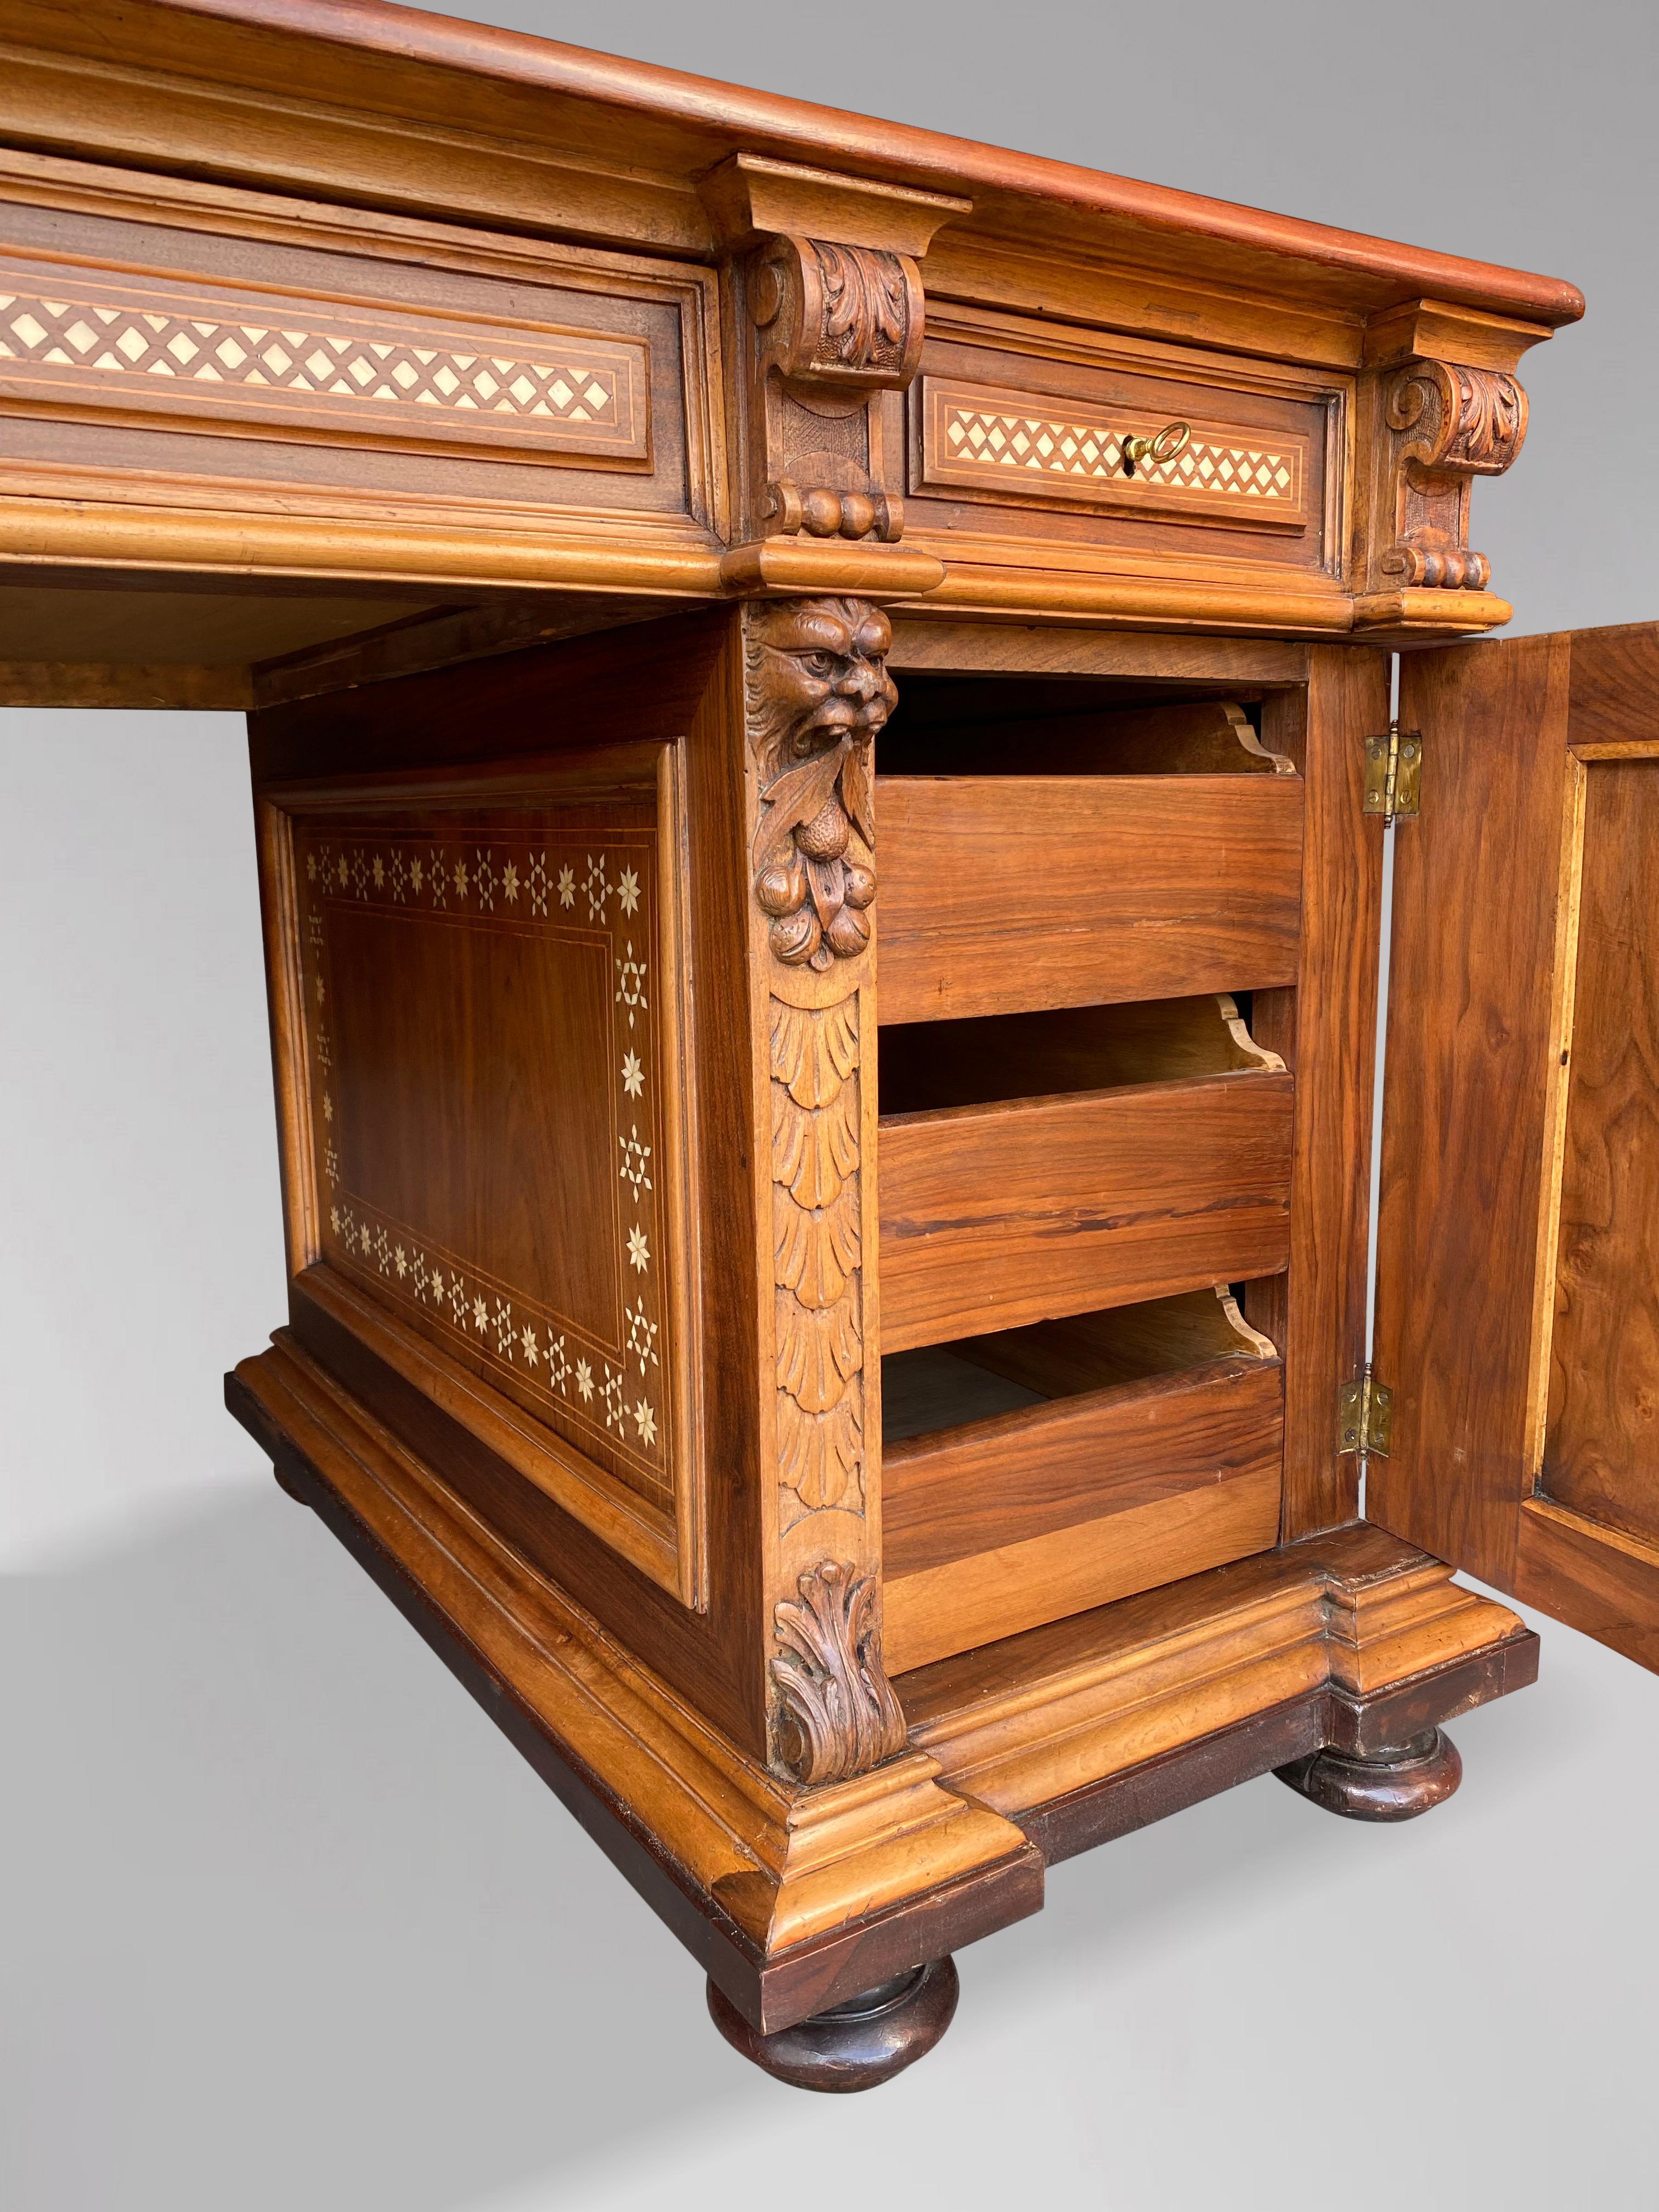 Early 20th Century Carved Walnut & Bone Inlay Pedestal Desk In Good Condition In Petworth,West Sussex, GB